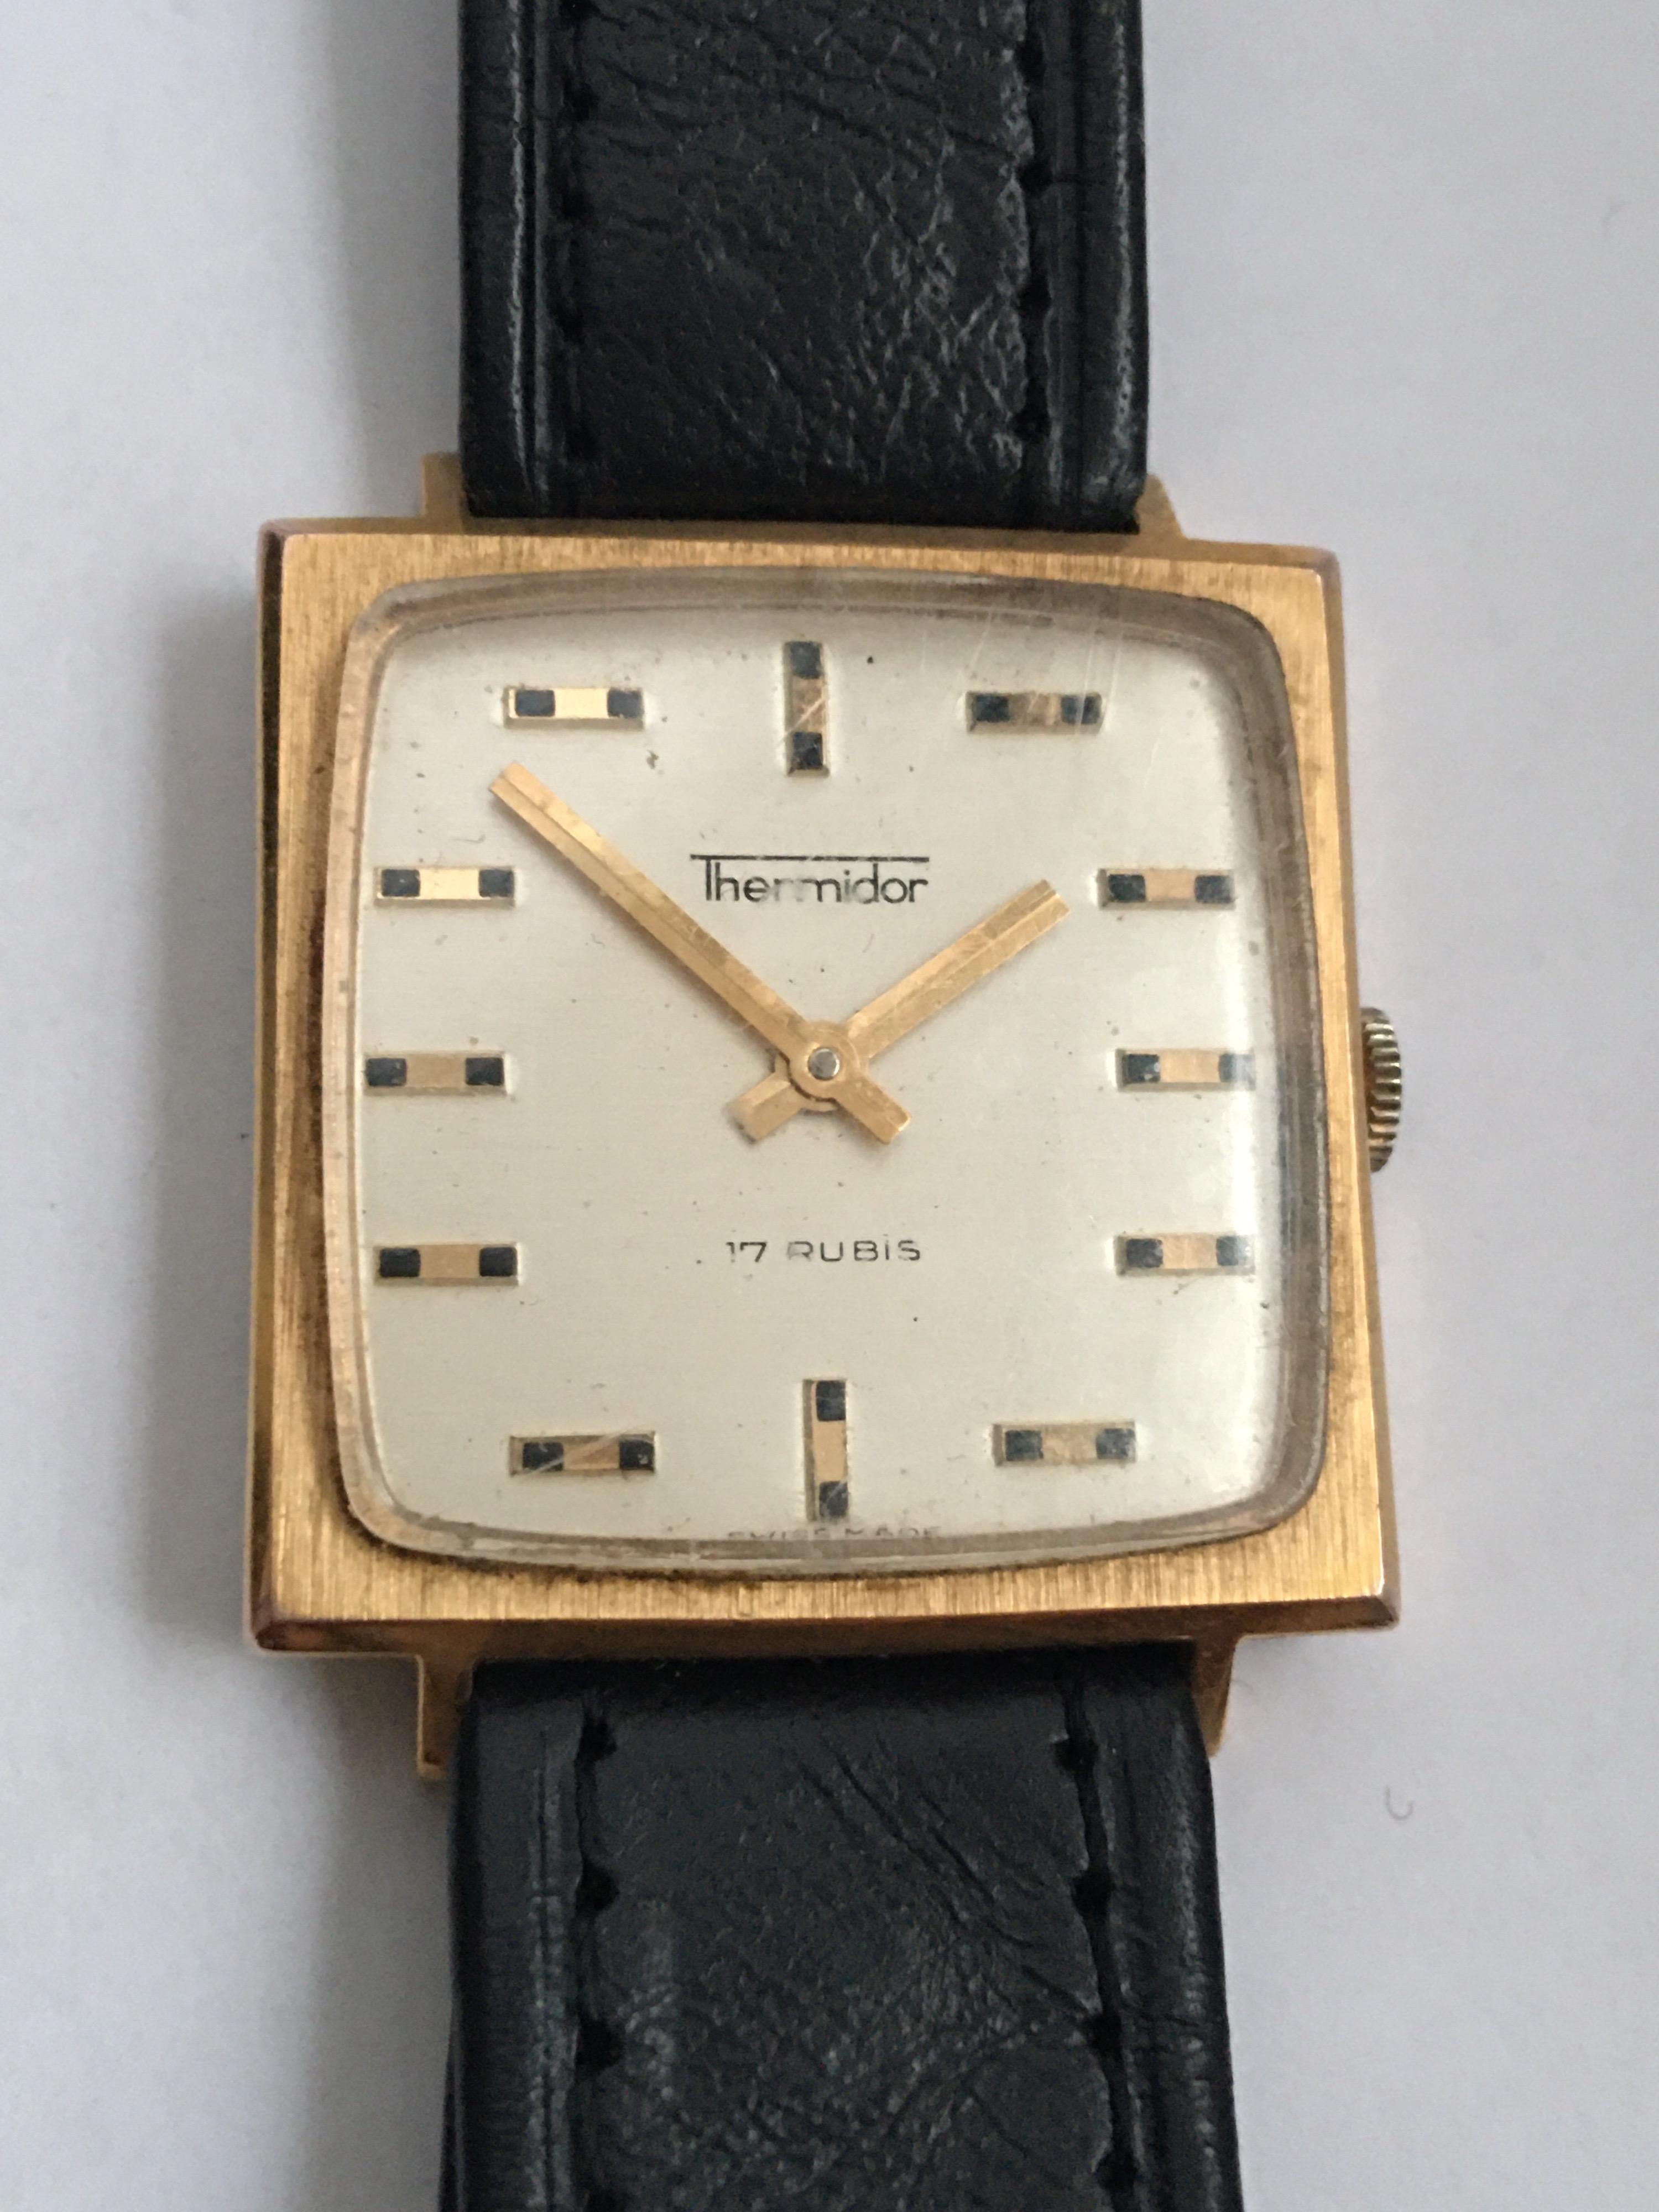 This beautiful Pre-owned vintage mechanical watch is working and is ticking well.  Visible signs of gentle wearing with little scratches on the glass and watch case. Strap is a bit worn with its Silver plated buckle.

Please study the photos